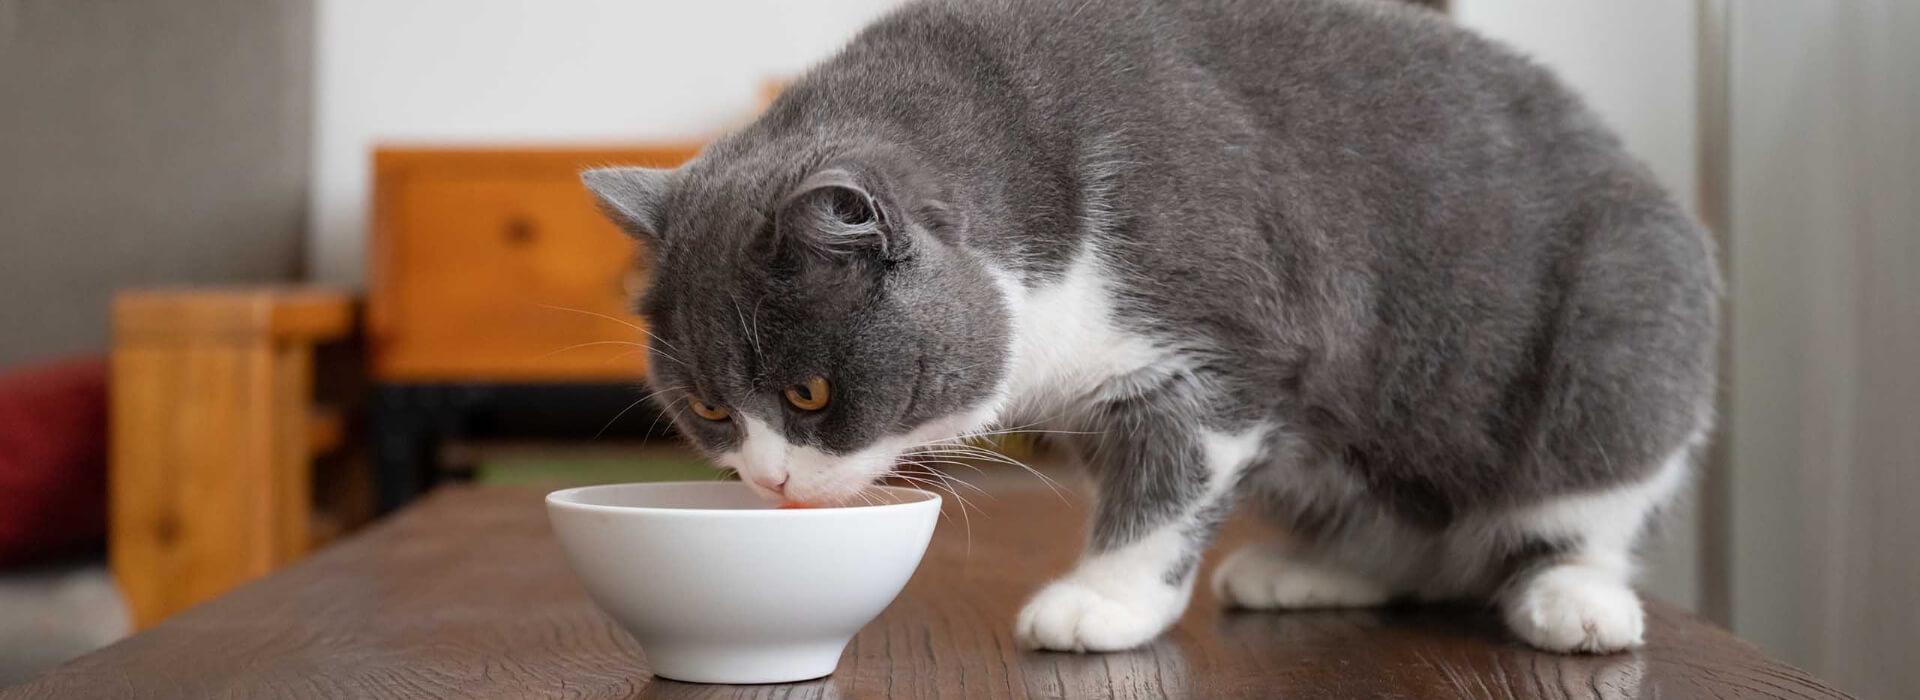 An image of a white and grey cat eating pet food